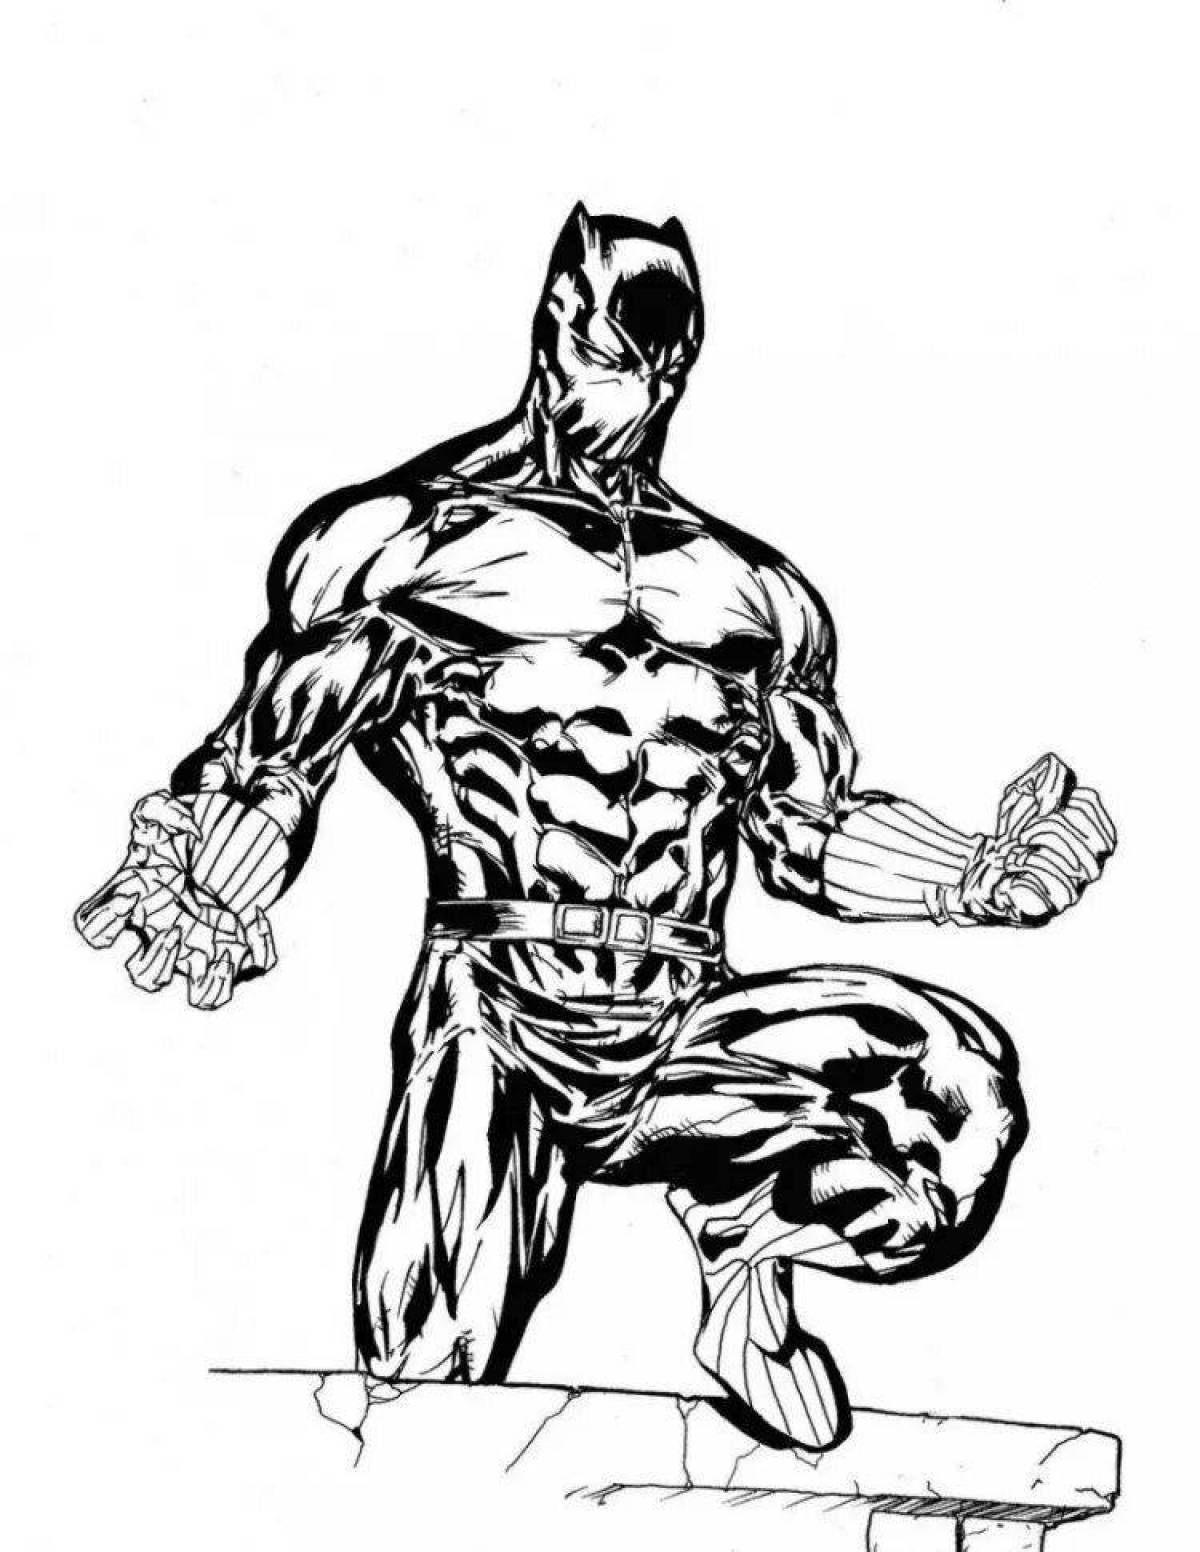 Marvel black panther amazing coloring book